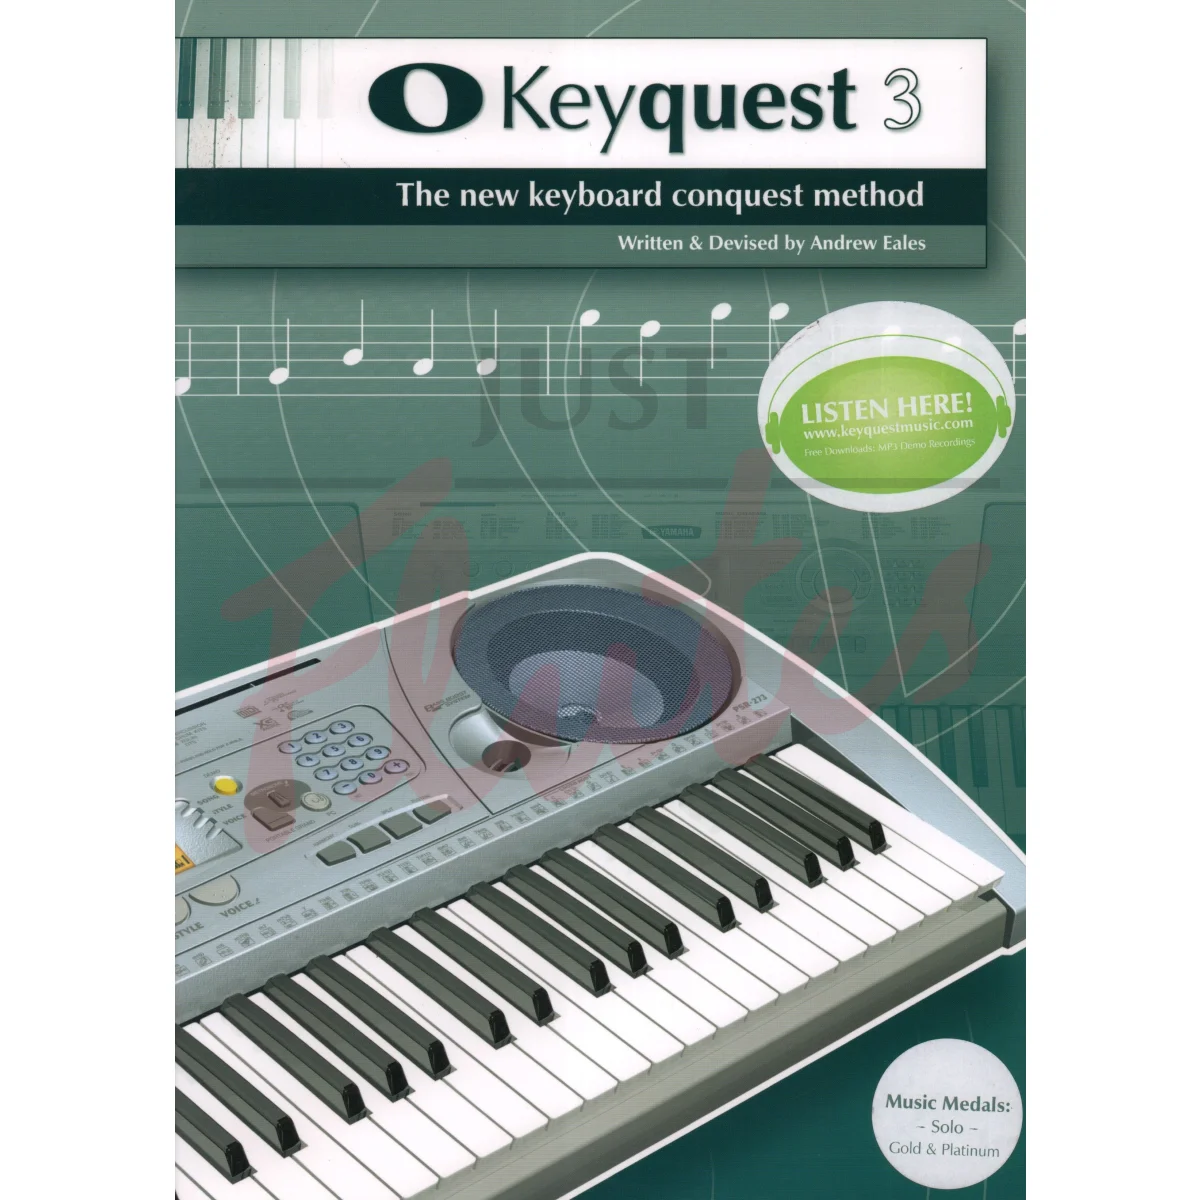 Keyquest 3: The New Keyboard Conquest Method